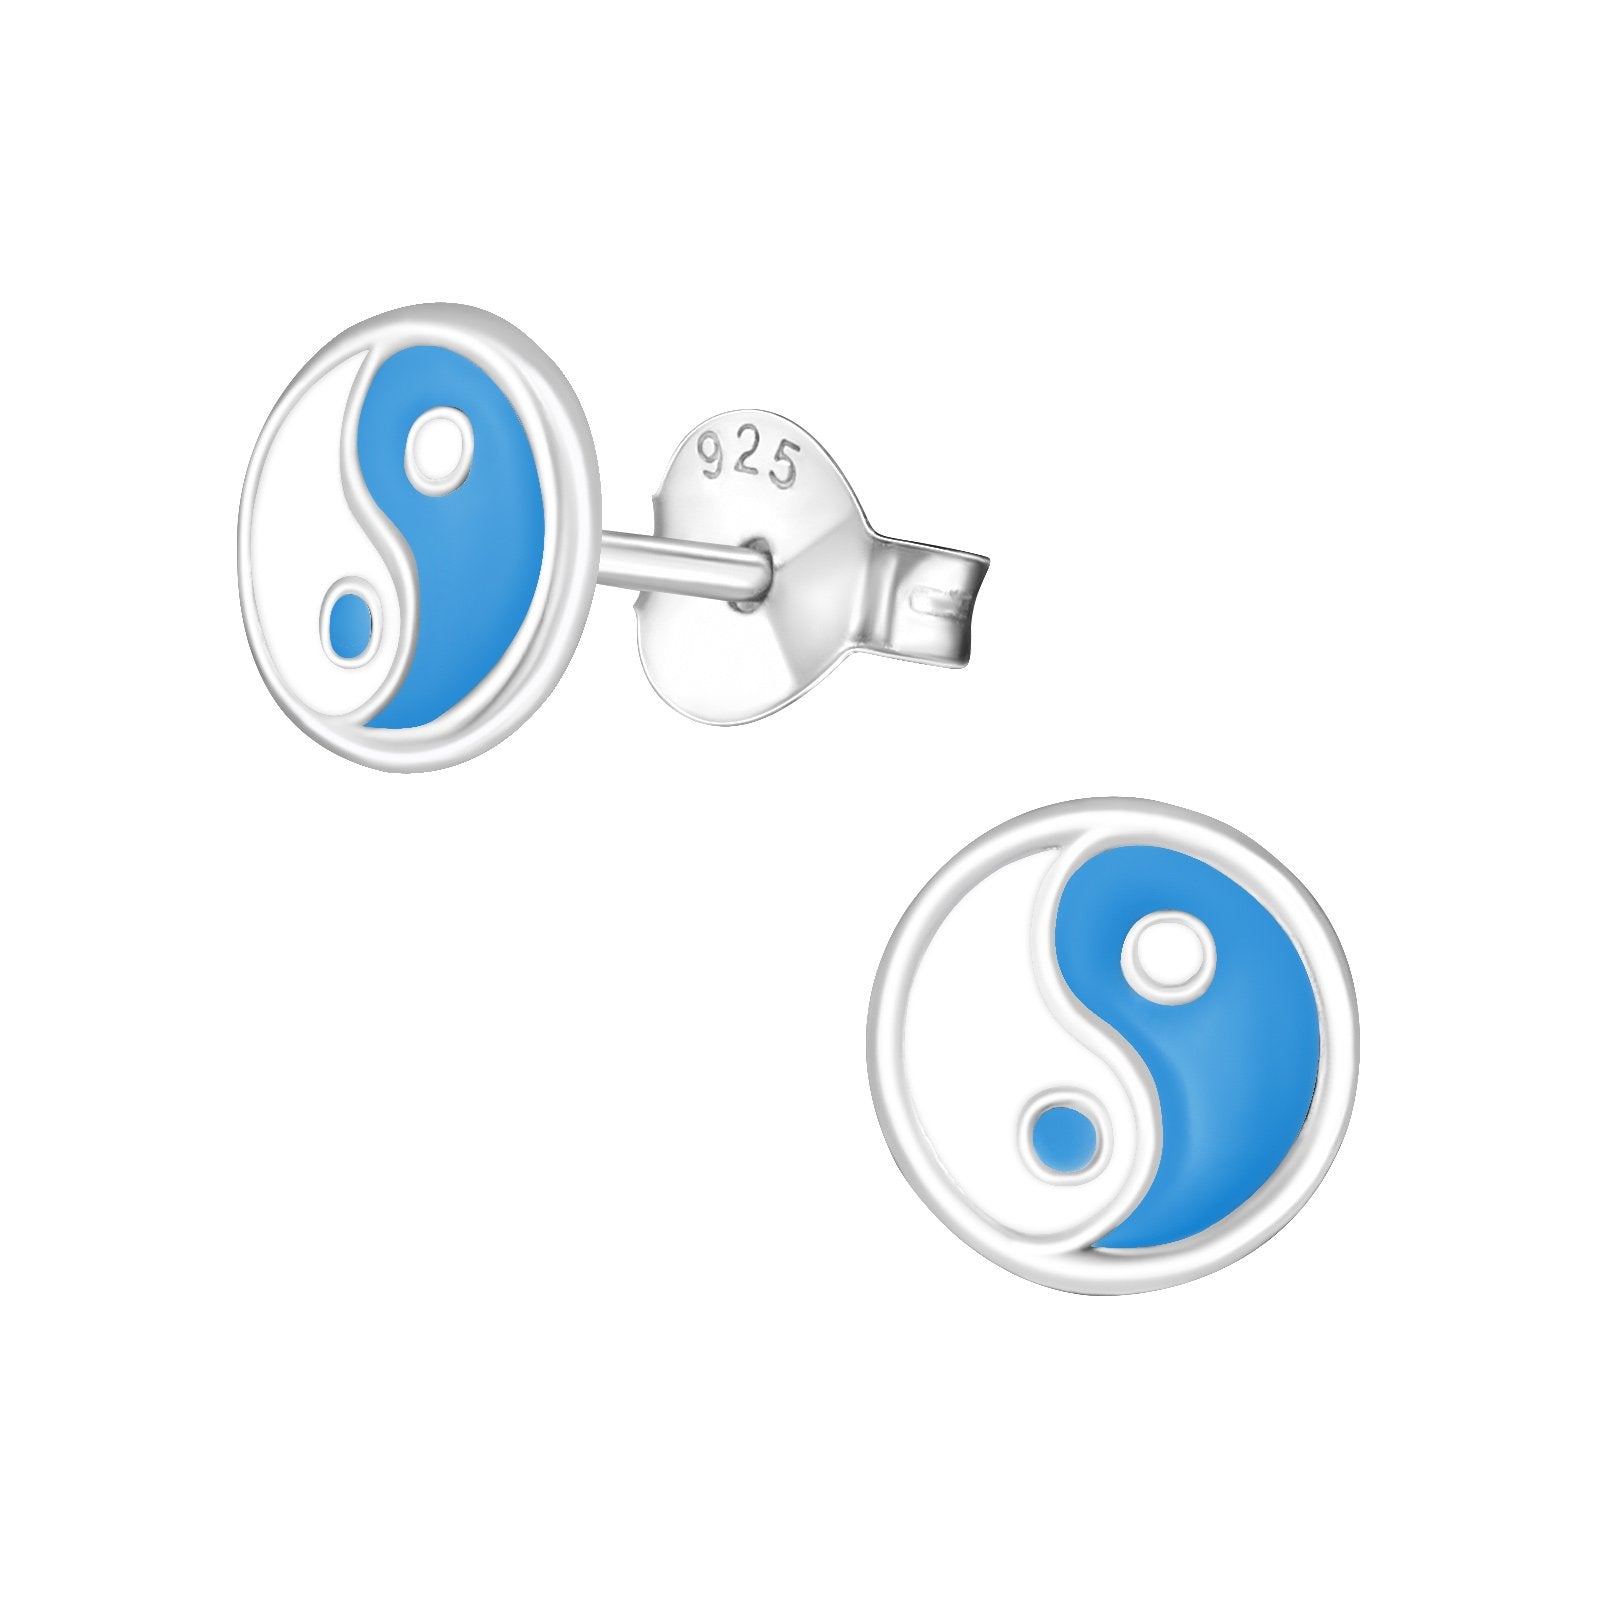 Yin And Yang Earrings (Blue And White)